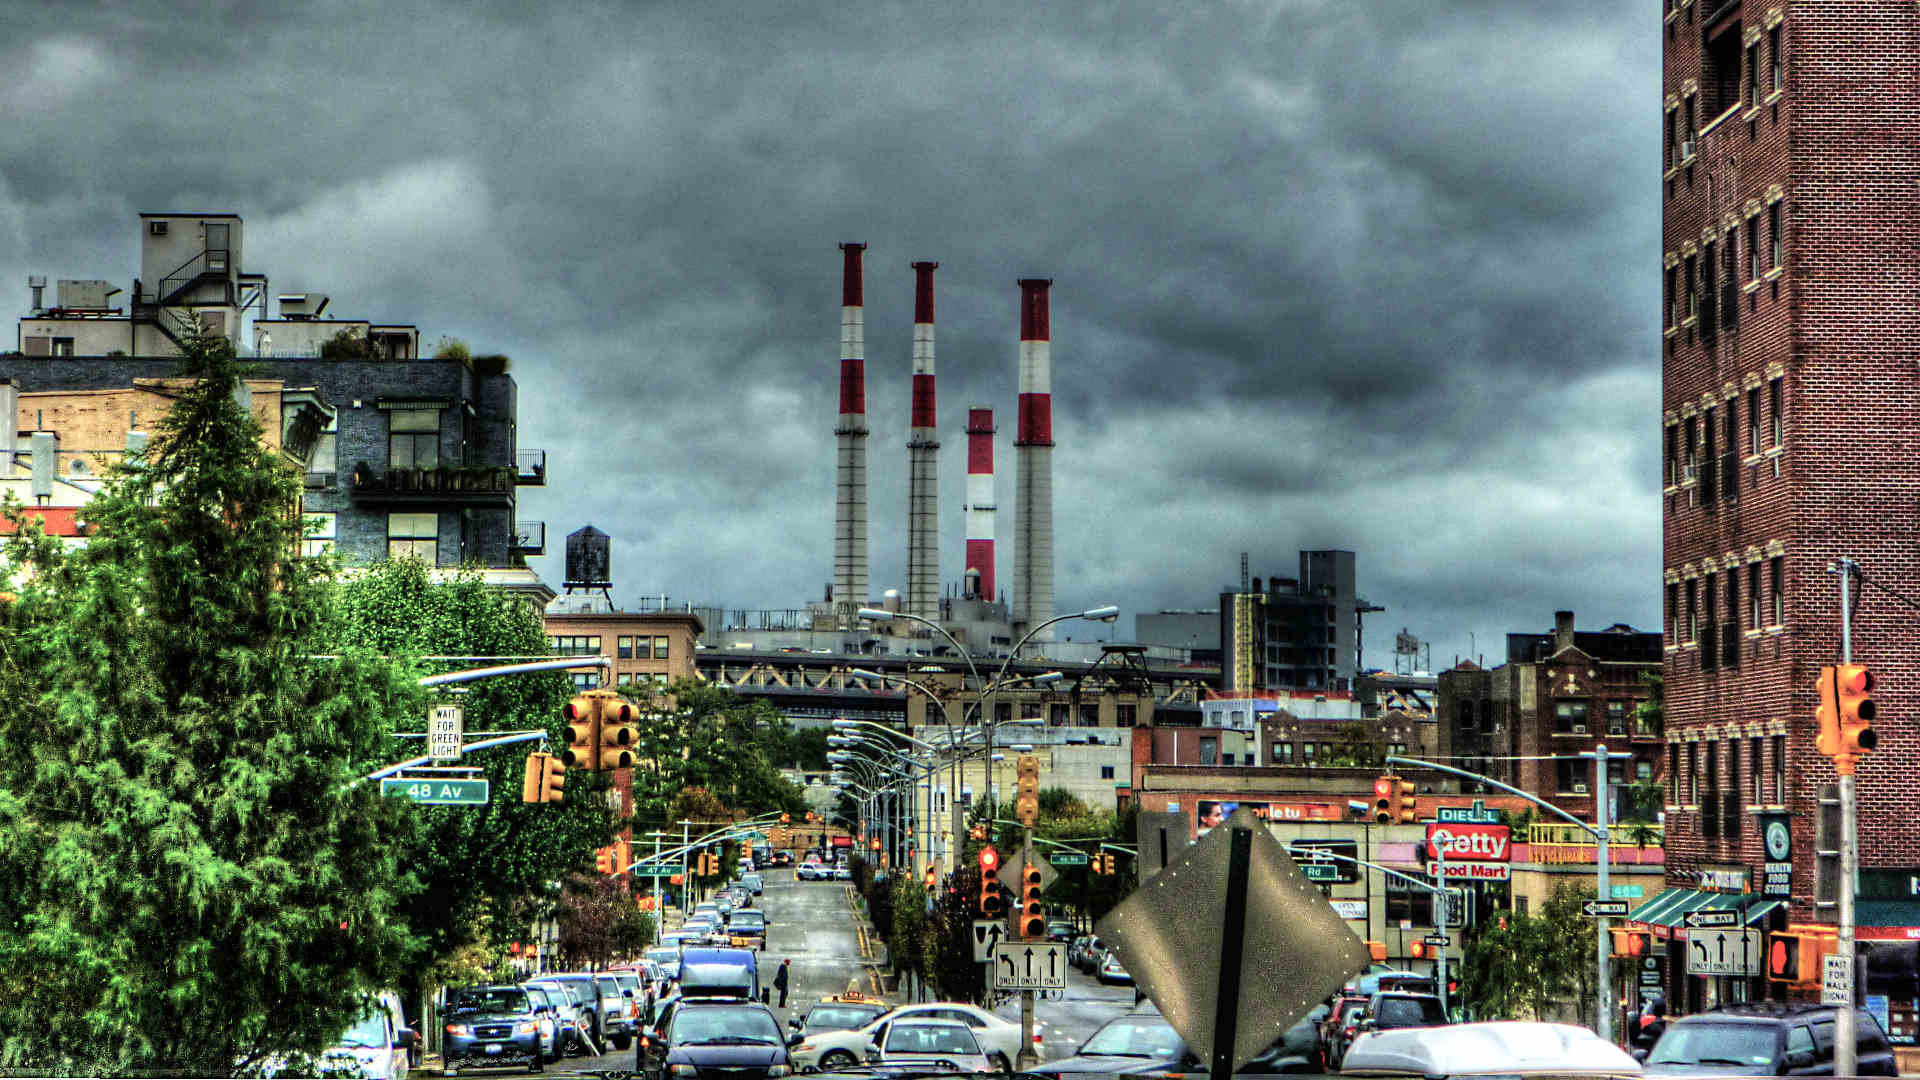 The smokestacks of the Ravenswood power plant in Long Island City, Queens, New York.